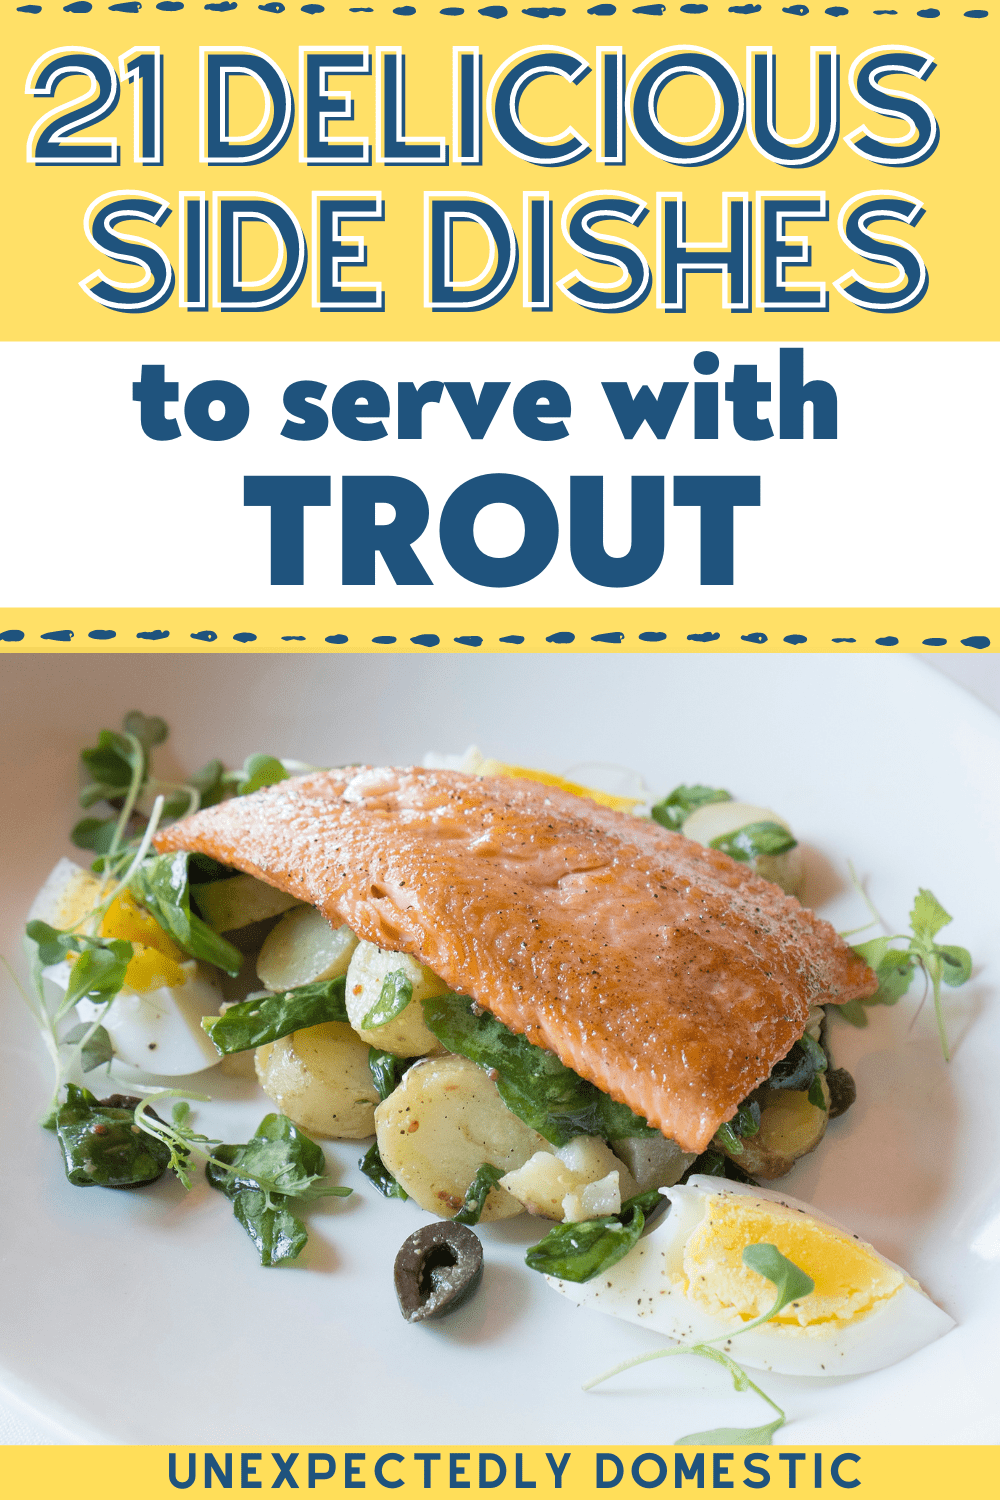 The best side dishes for trout! Here’s exactly what to serve with rainbow trout for dinner.